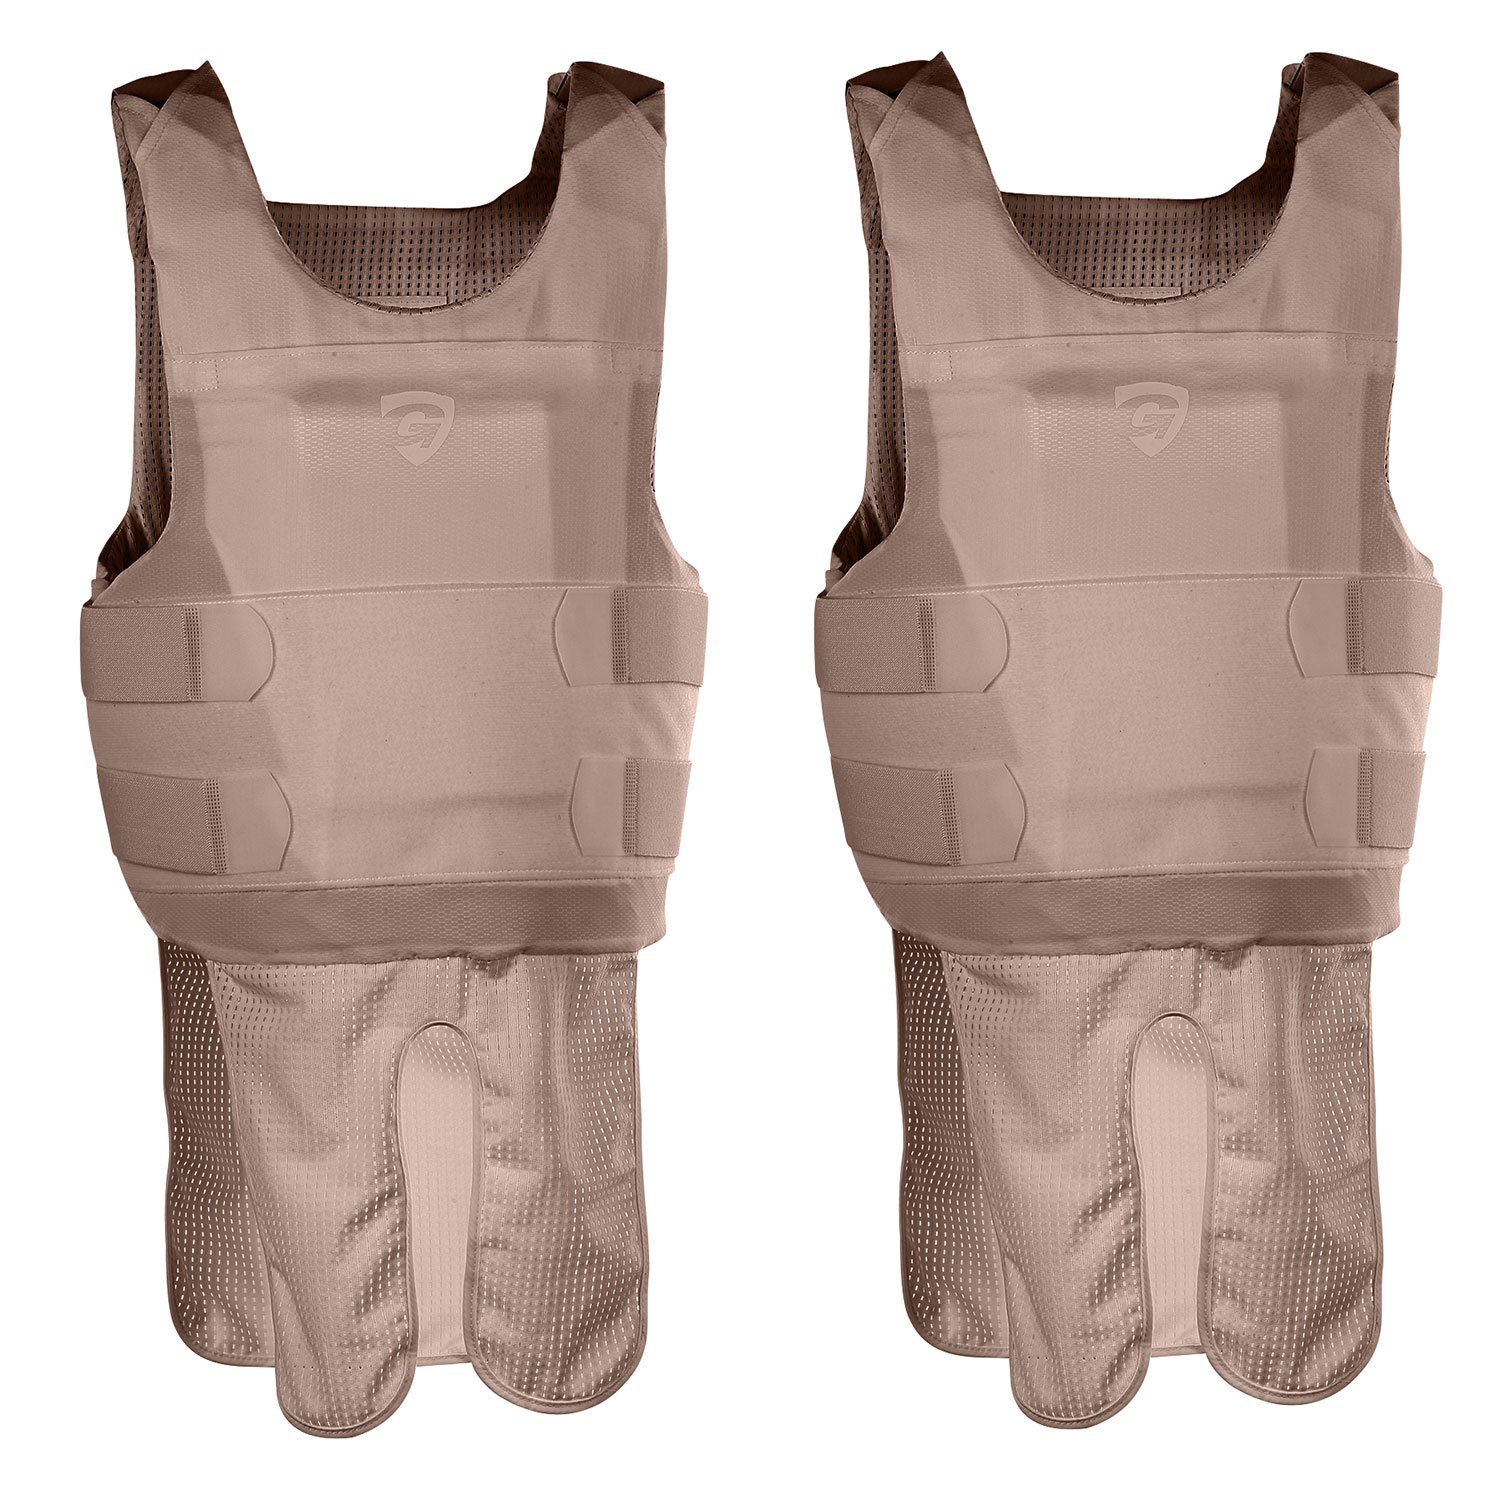 Galls G Force Level II Concealable Body Armor w 2 Carriers